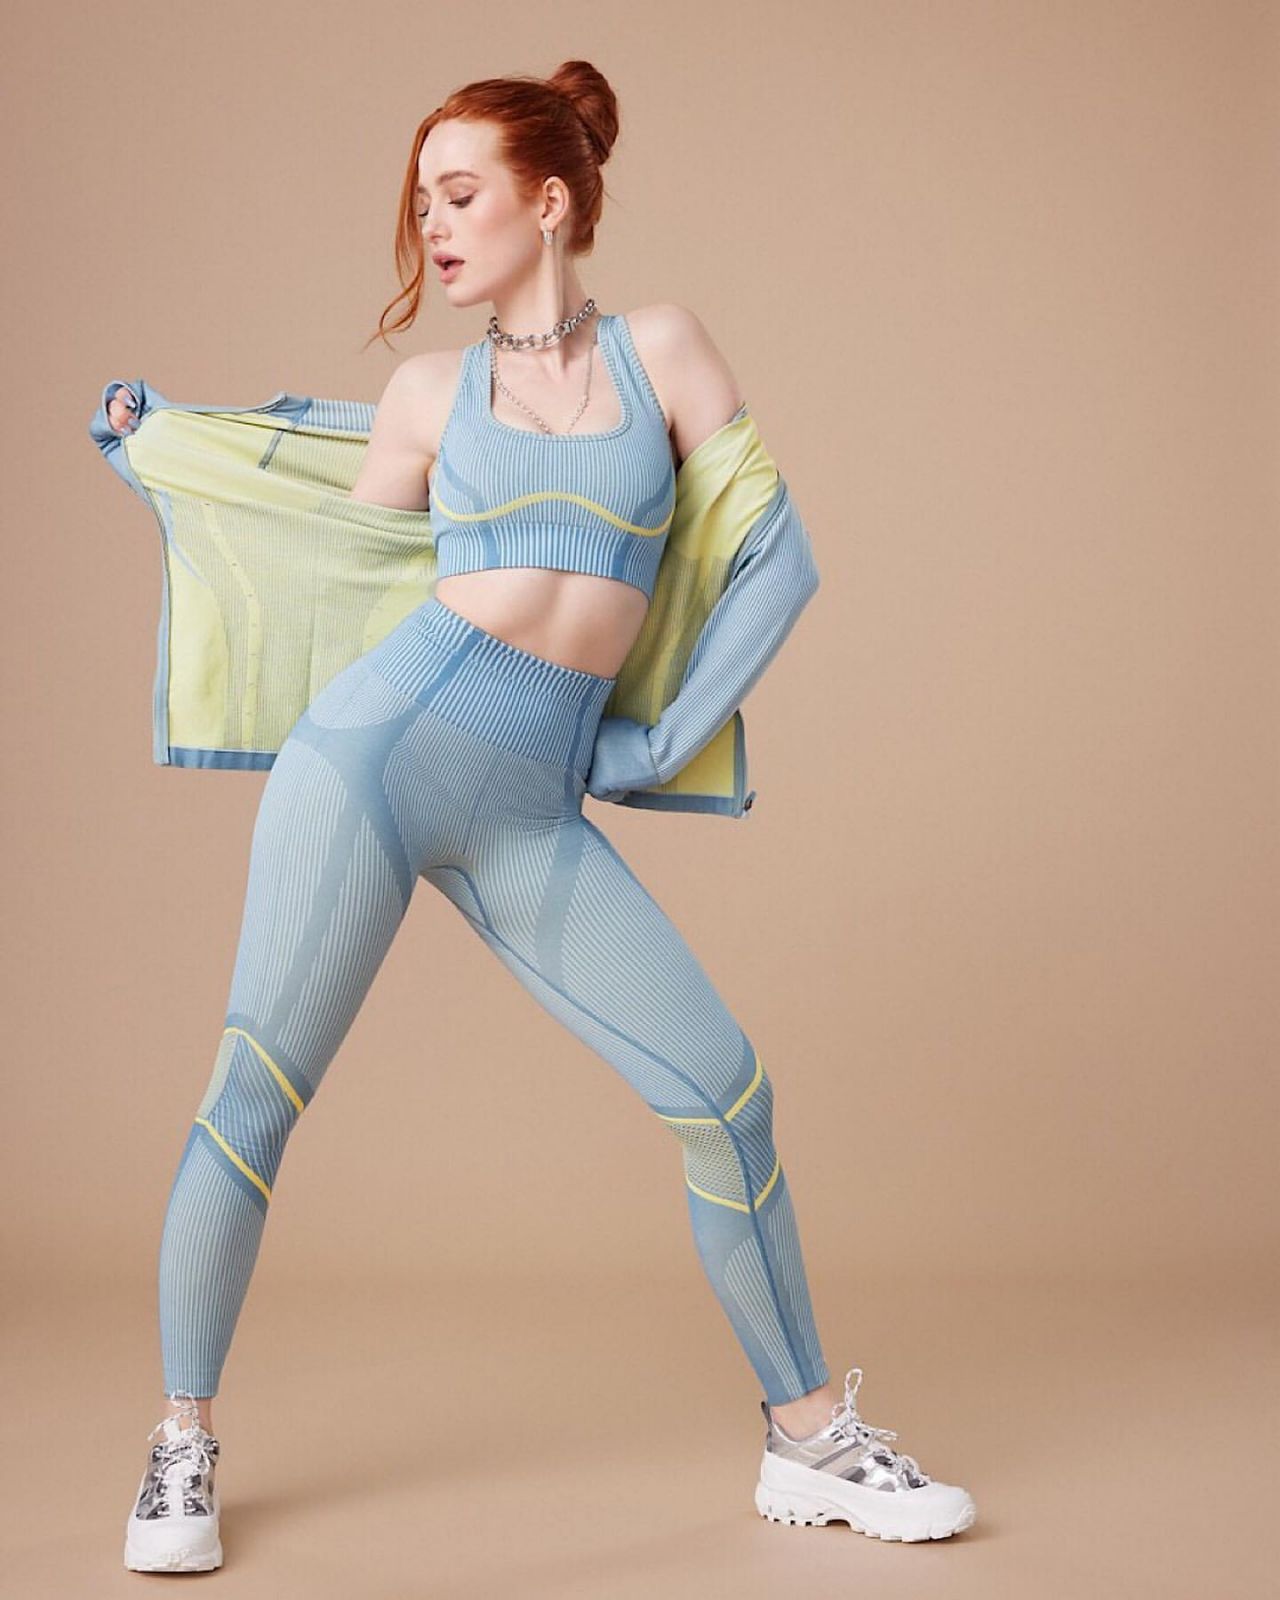 Madelaine Petsch - Fabletics x Madelaine Collection 2021 (more photos) .